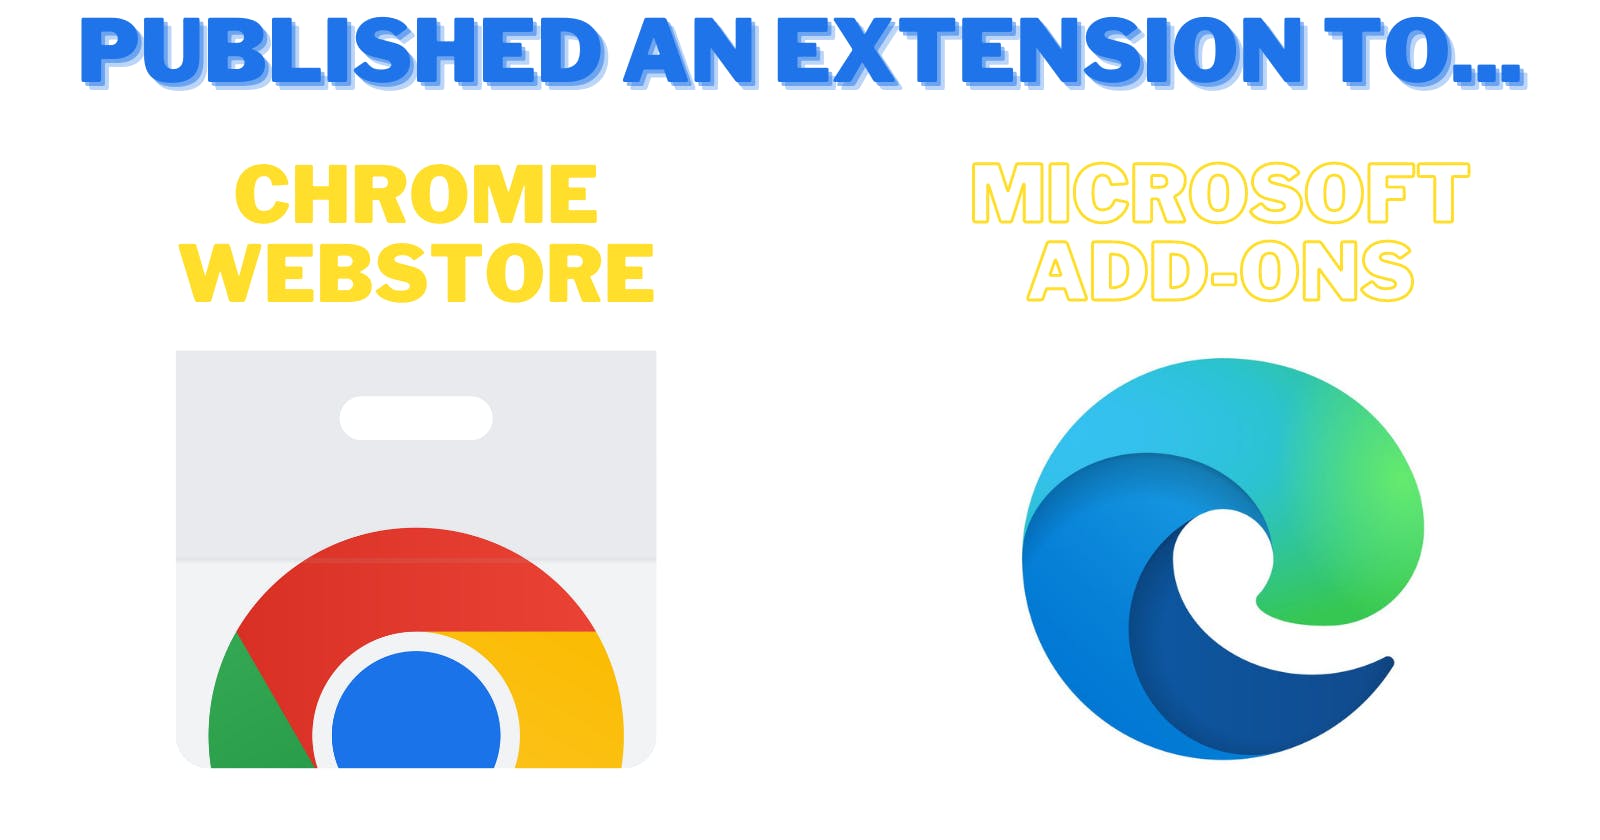 Published an Extension to Chrome Webstore and Microsoft Edge Add-ons